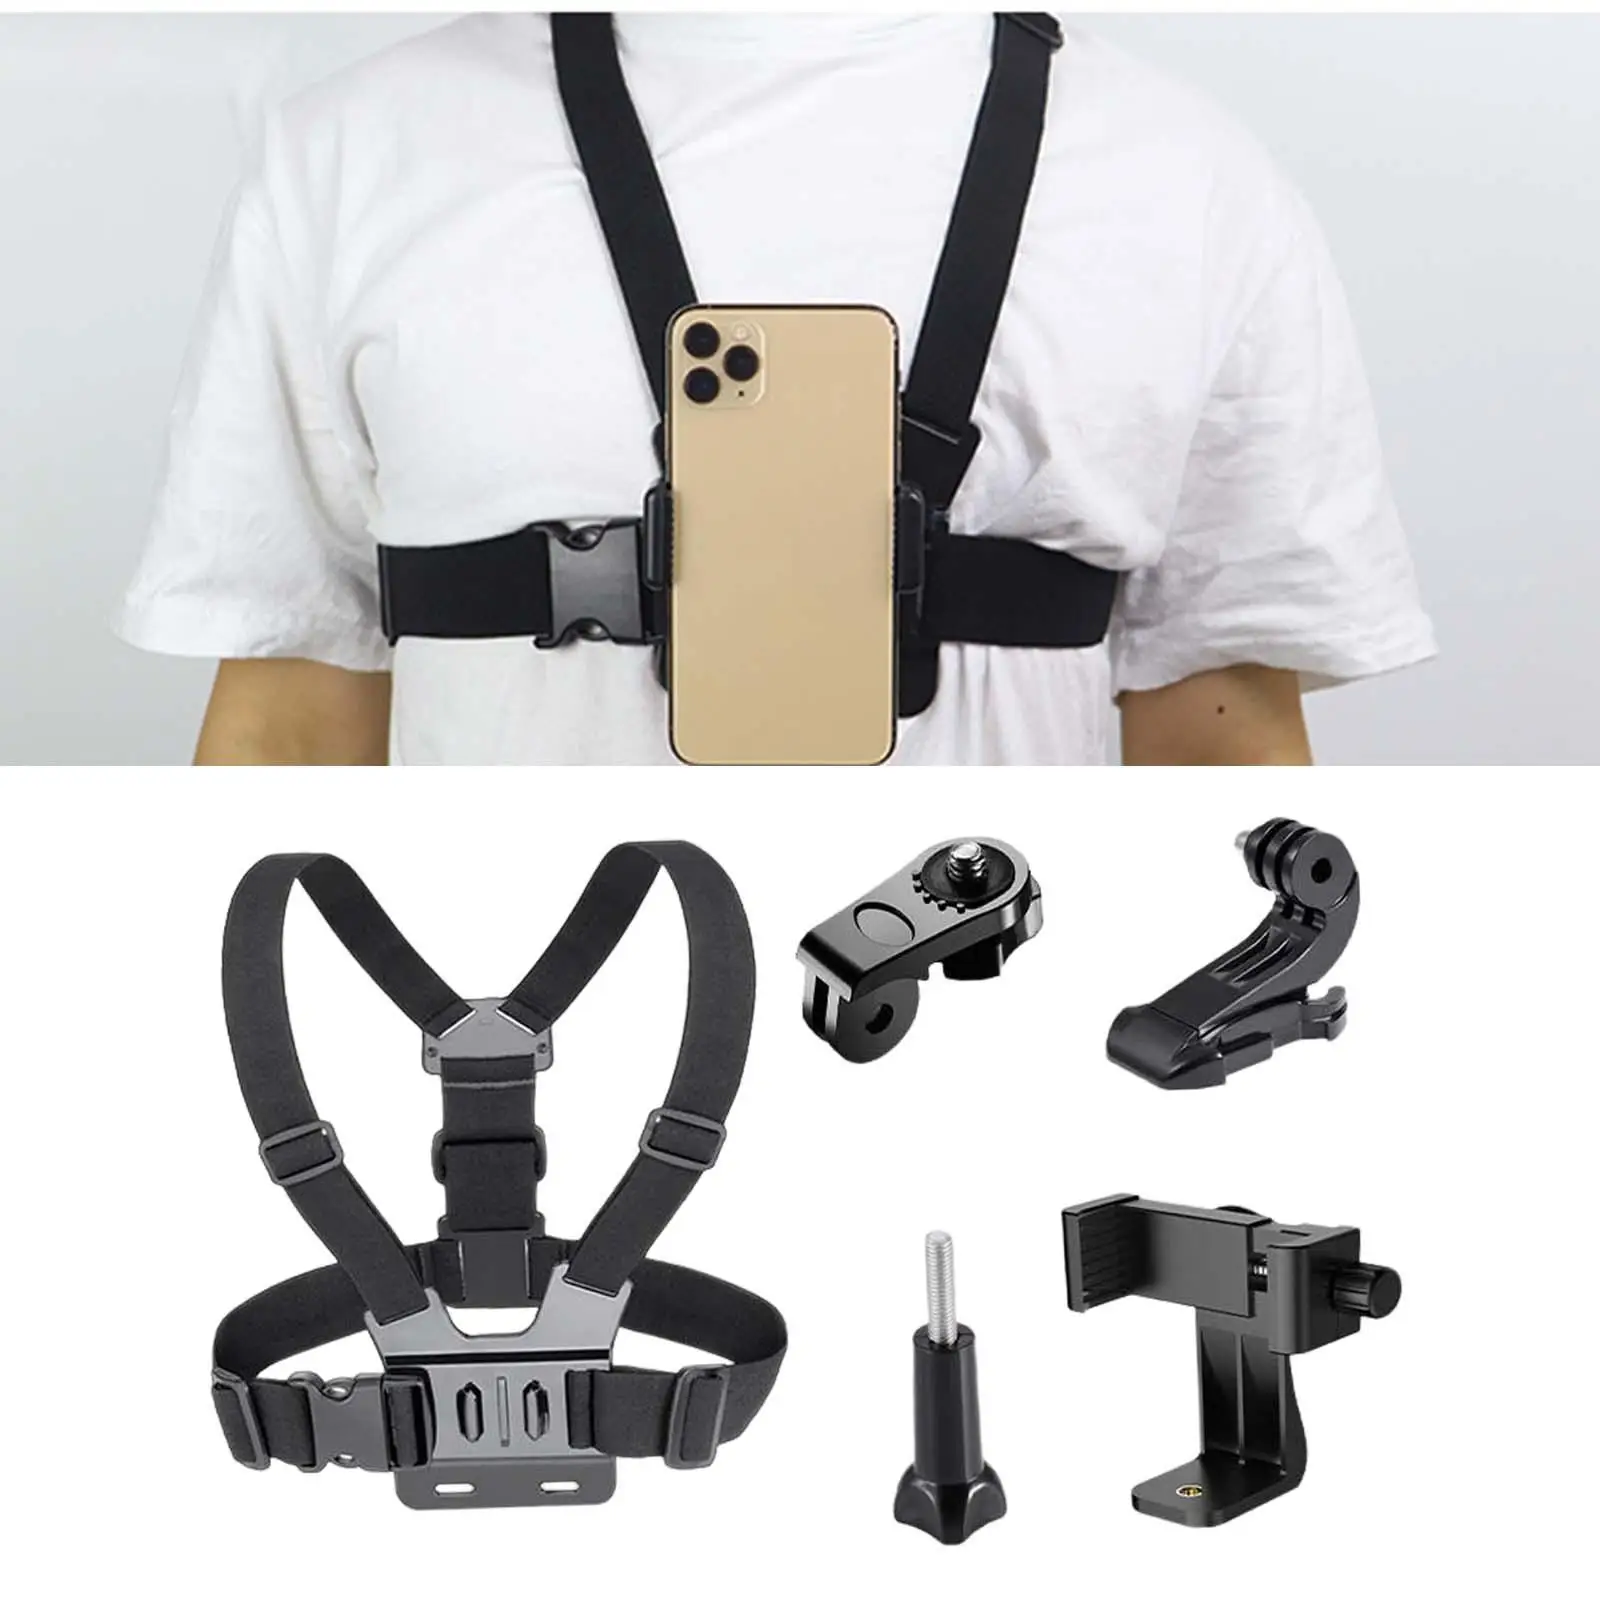 Phones Chest Strap Mount Belt Adjustable Quick Clip Mount 5 in 1 Waist Belt for Outdoor Cycling Action Cameras Smartphone Skiing